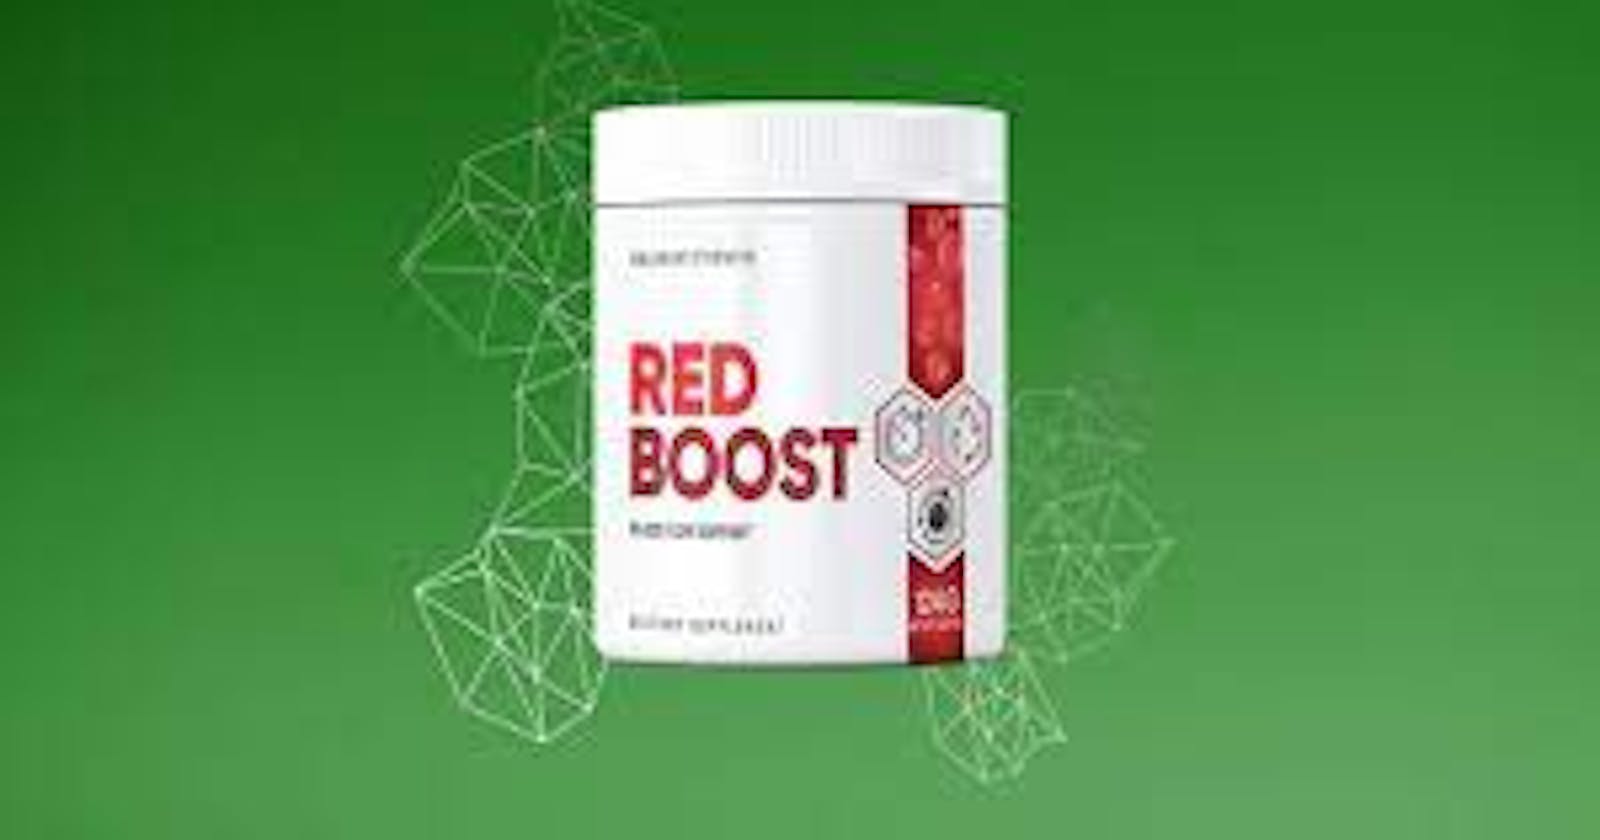 Red Boost - Blood Sugar Reviews, Benefits, Warnings & Complaints?